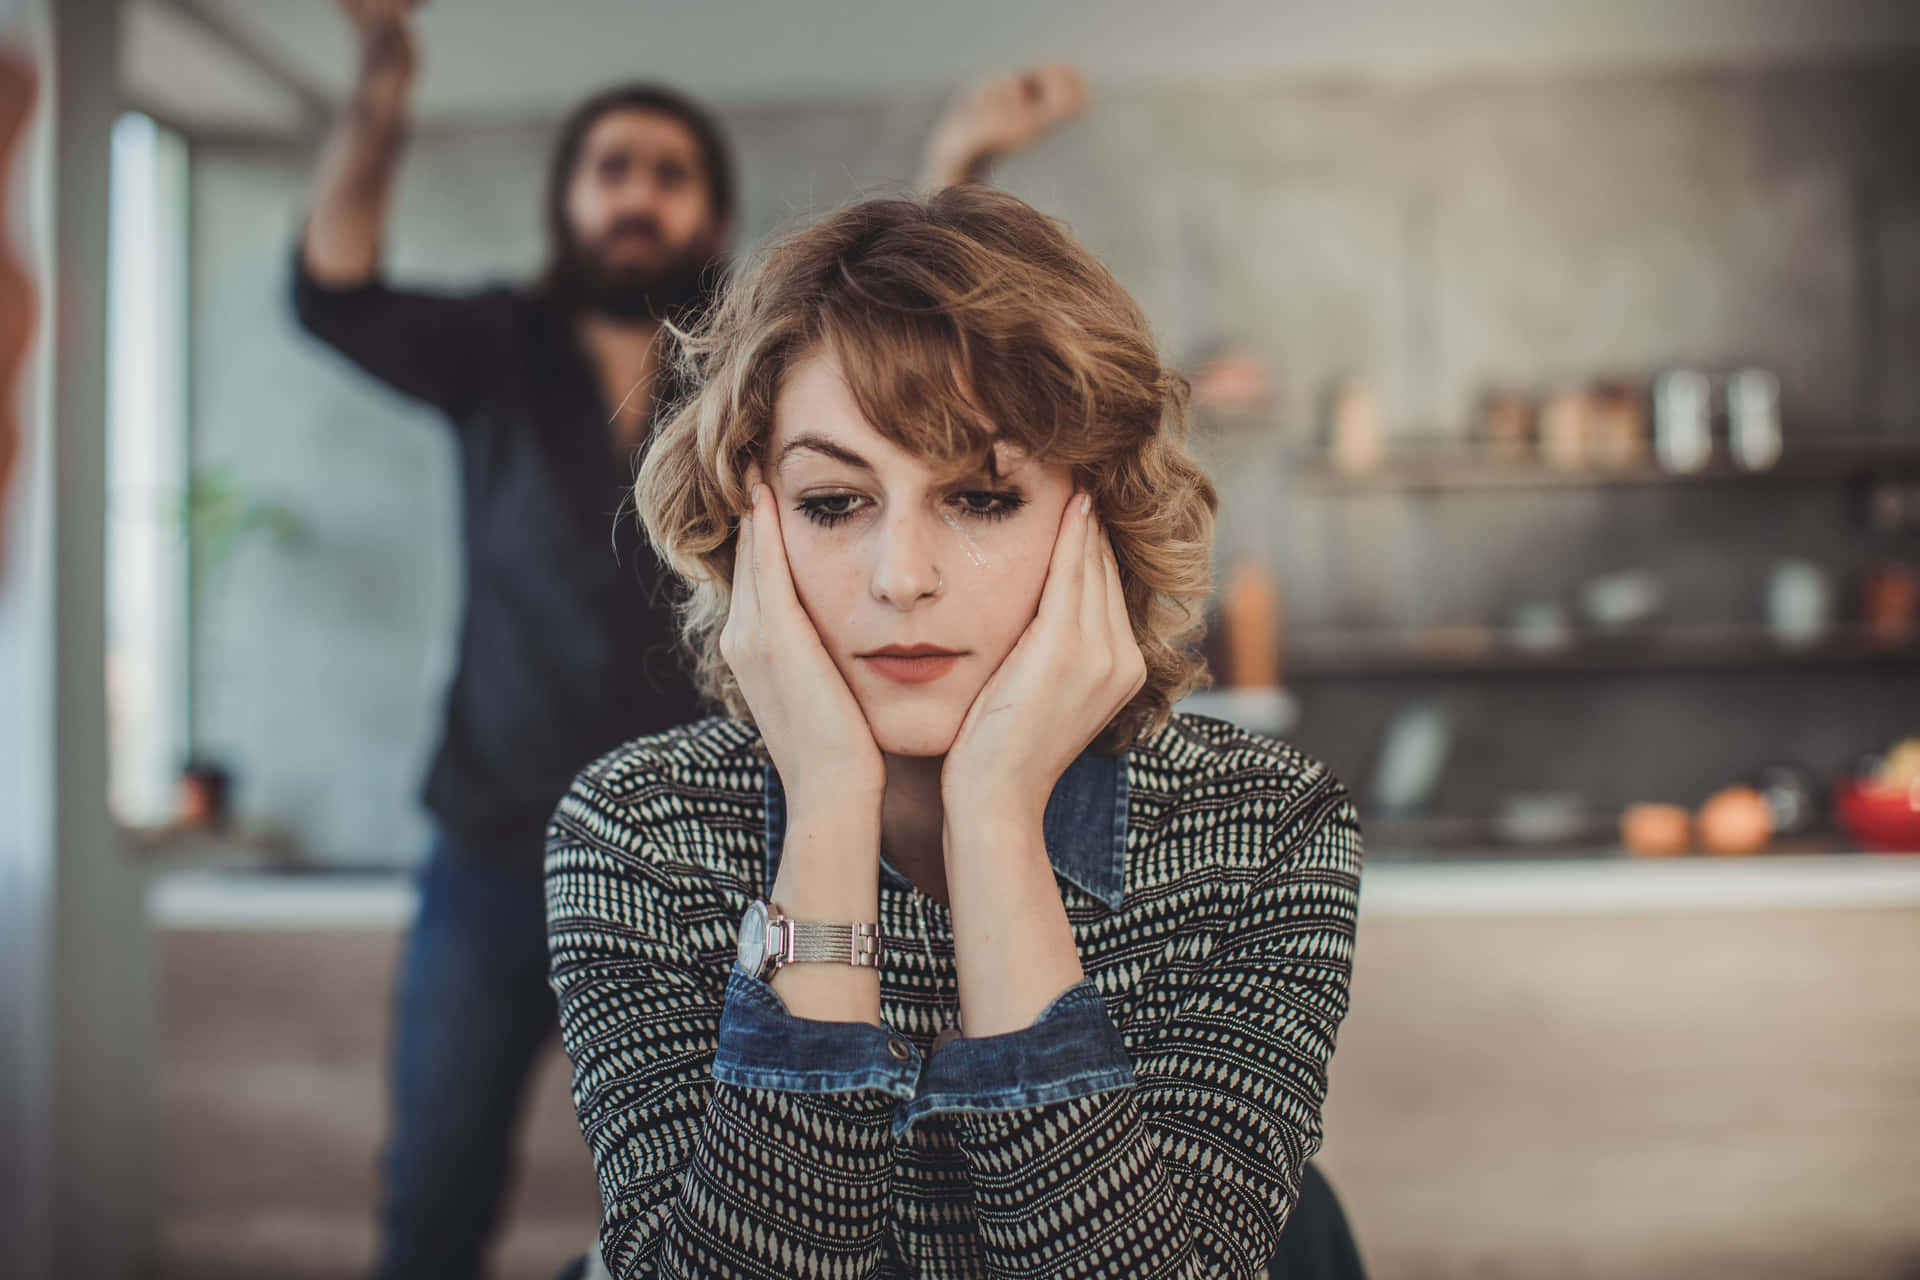 Woman In The Kitchen With Man In The Background Toxic Relationship Wallpaper